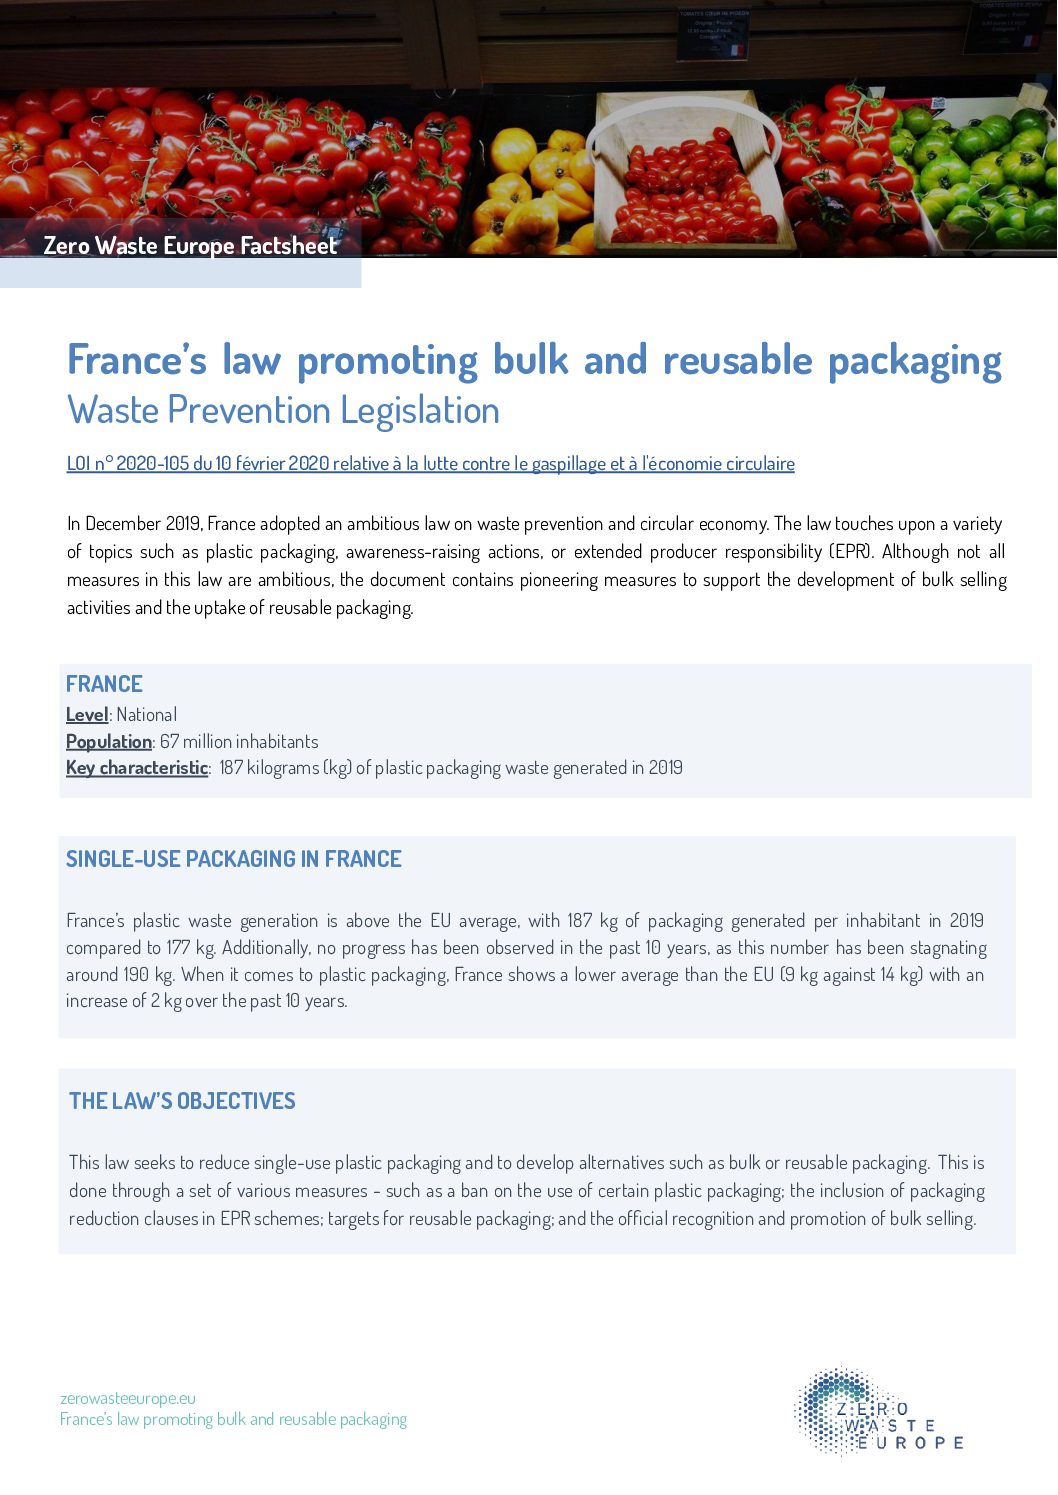 France’s law promoting bulk and reusable packaging